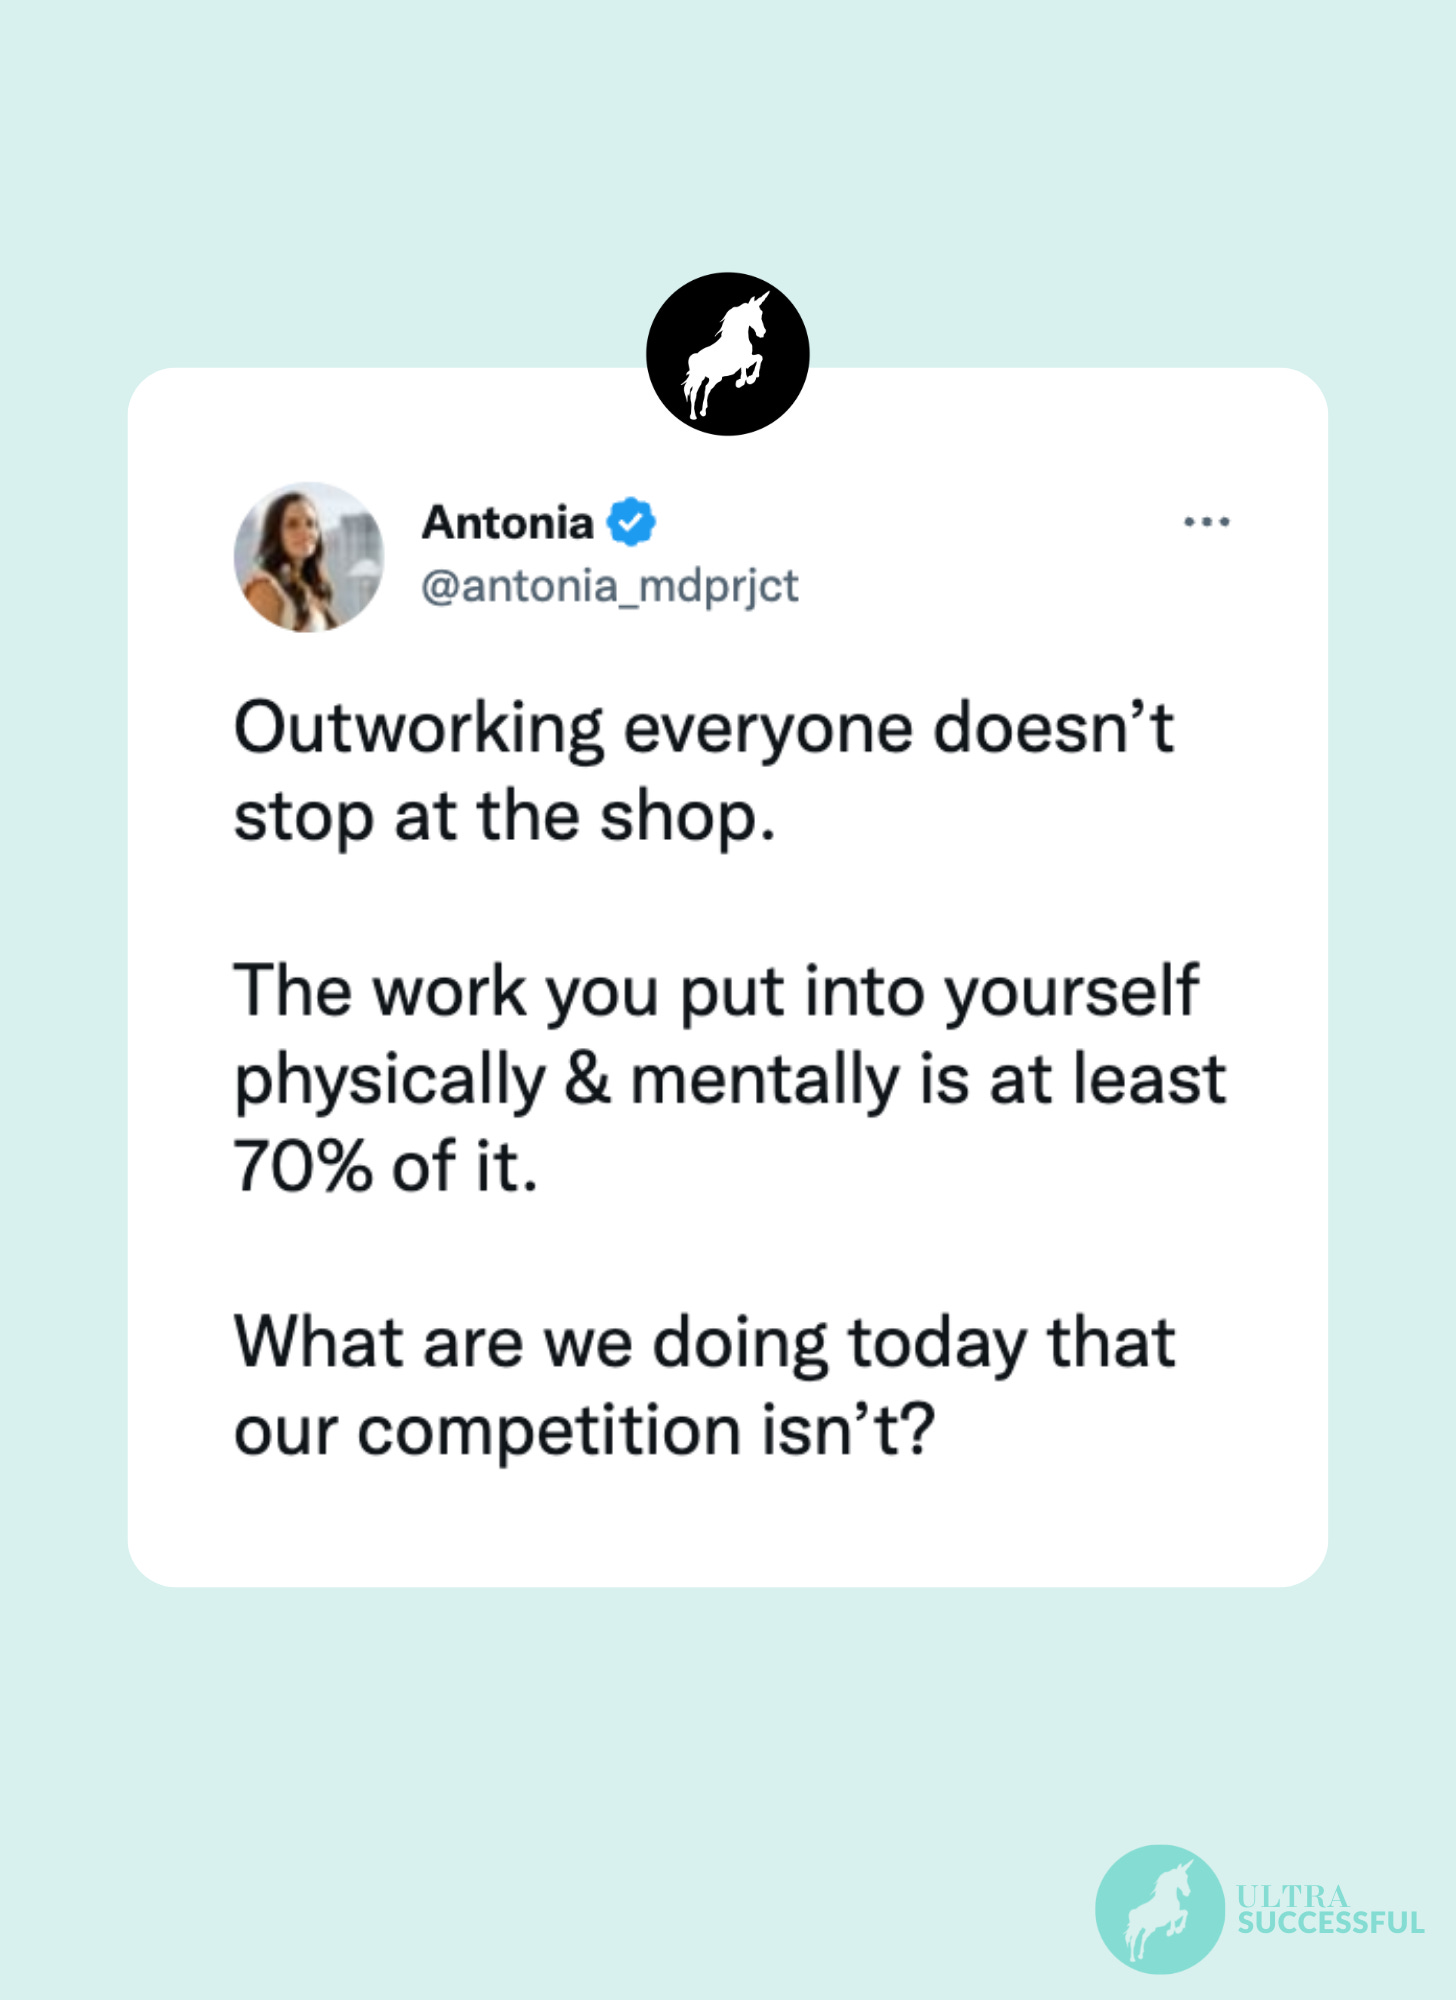 @antonia_mdprjct: Outworking everyone doesn’t stop at the shop.   The work you put into yourself physically & mentally is at least 70% of it.   What are we doing today that our competition isn’t?